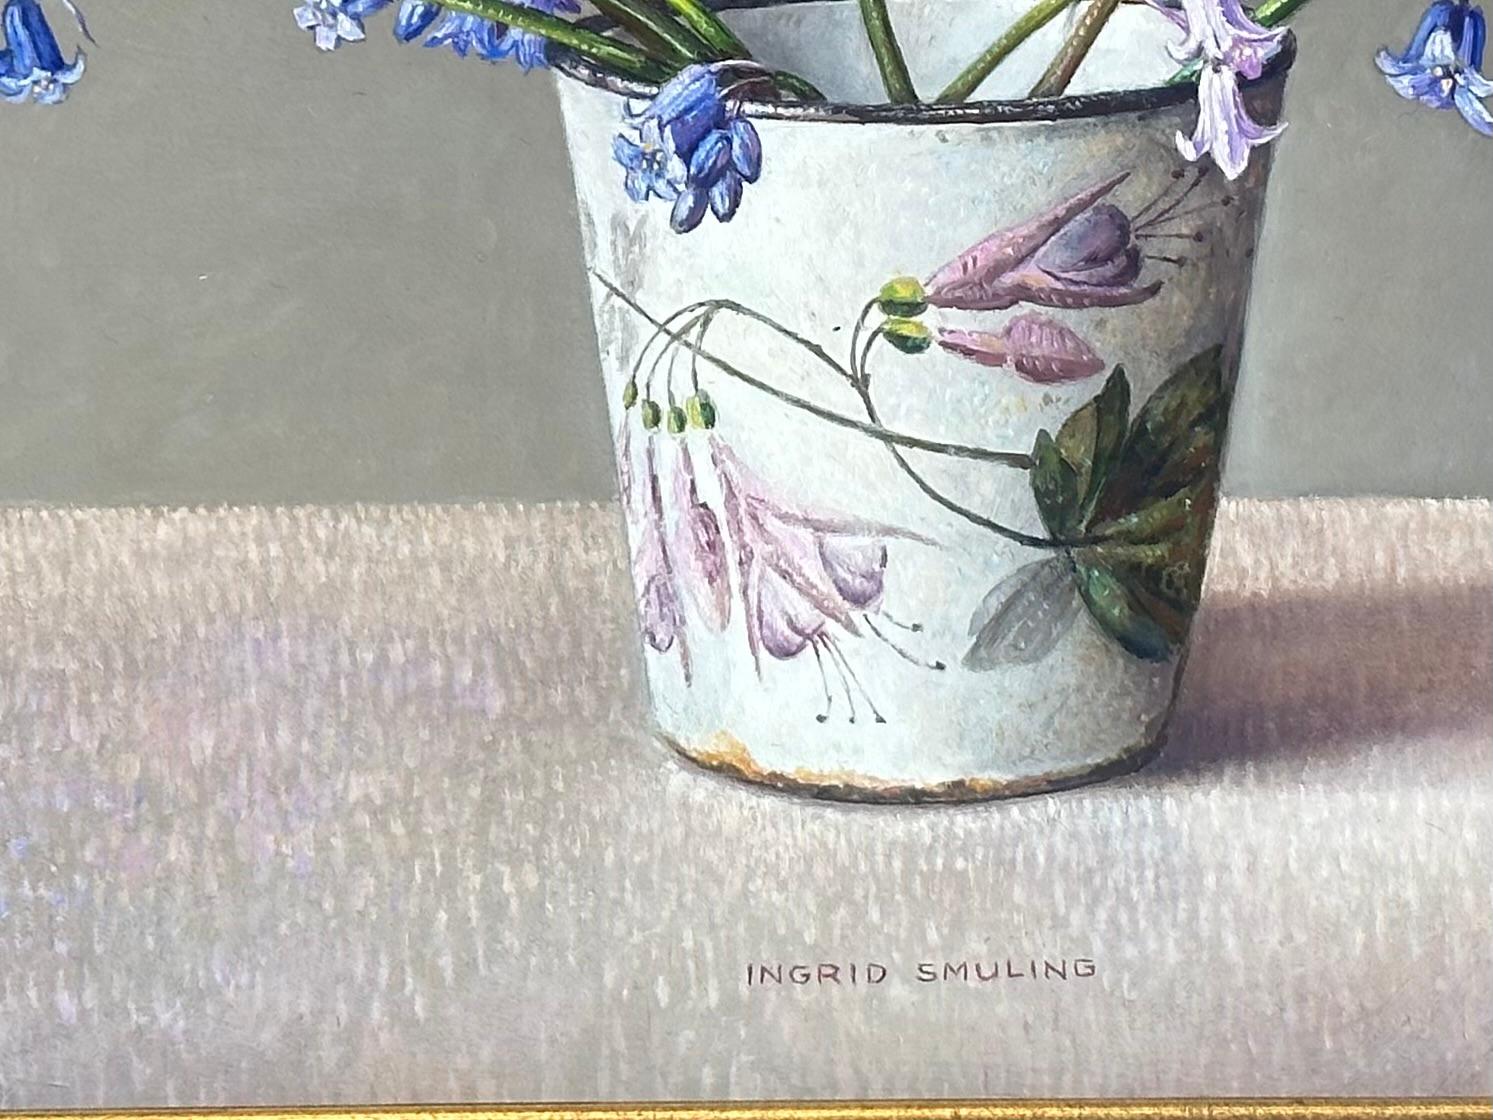 Ingrid Smuling
Wild hyacinth 
20 x 30 cm ( Frame is included, size with frame: 25 x 35)
Oil on wood panel


This grand lady of Still life painting is still working every day at the age of almost 80 years.
Her small realistic series of jugs, bowls,